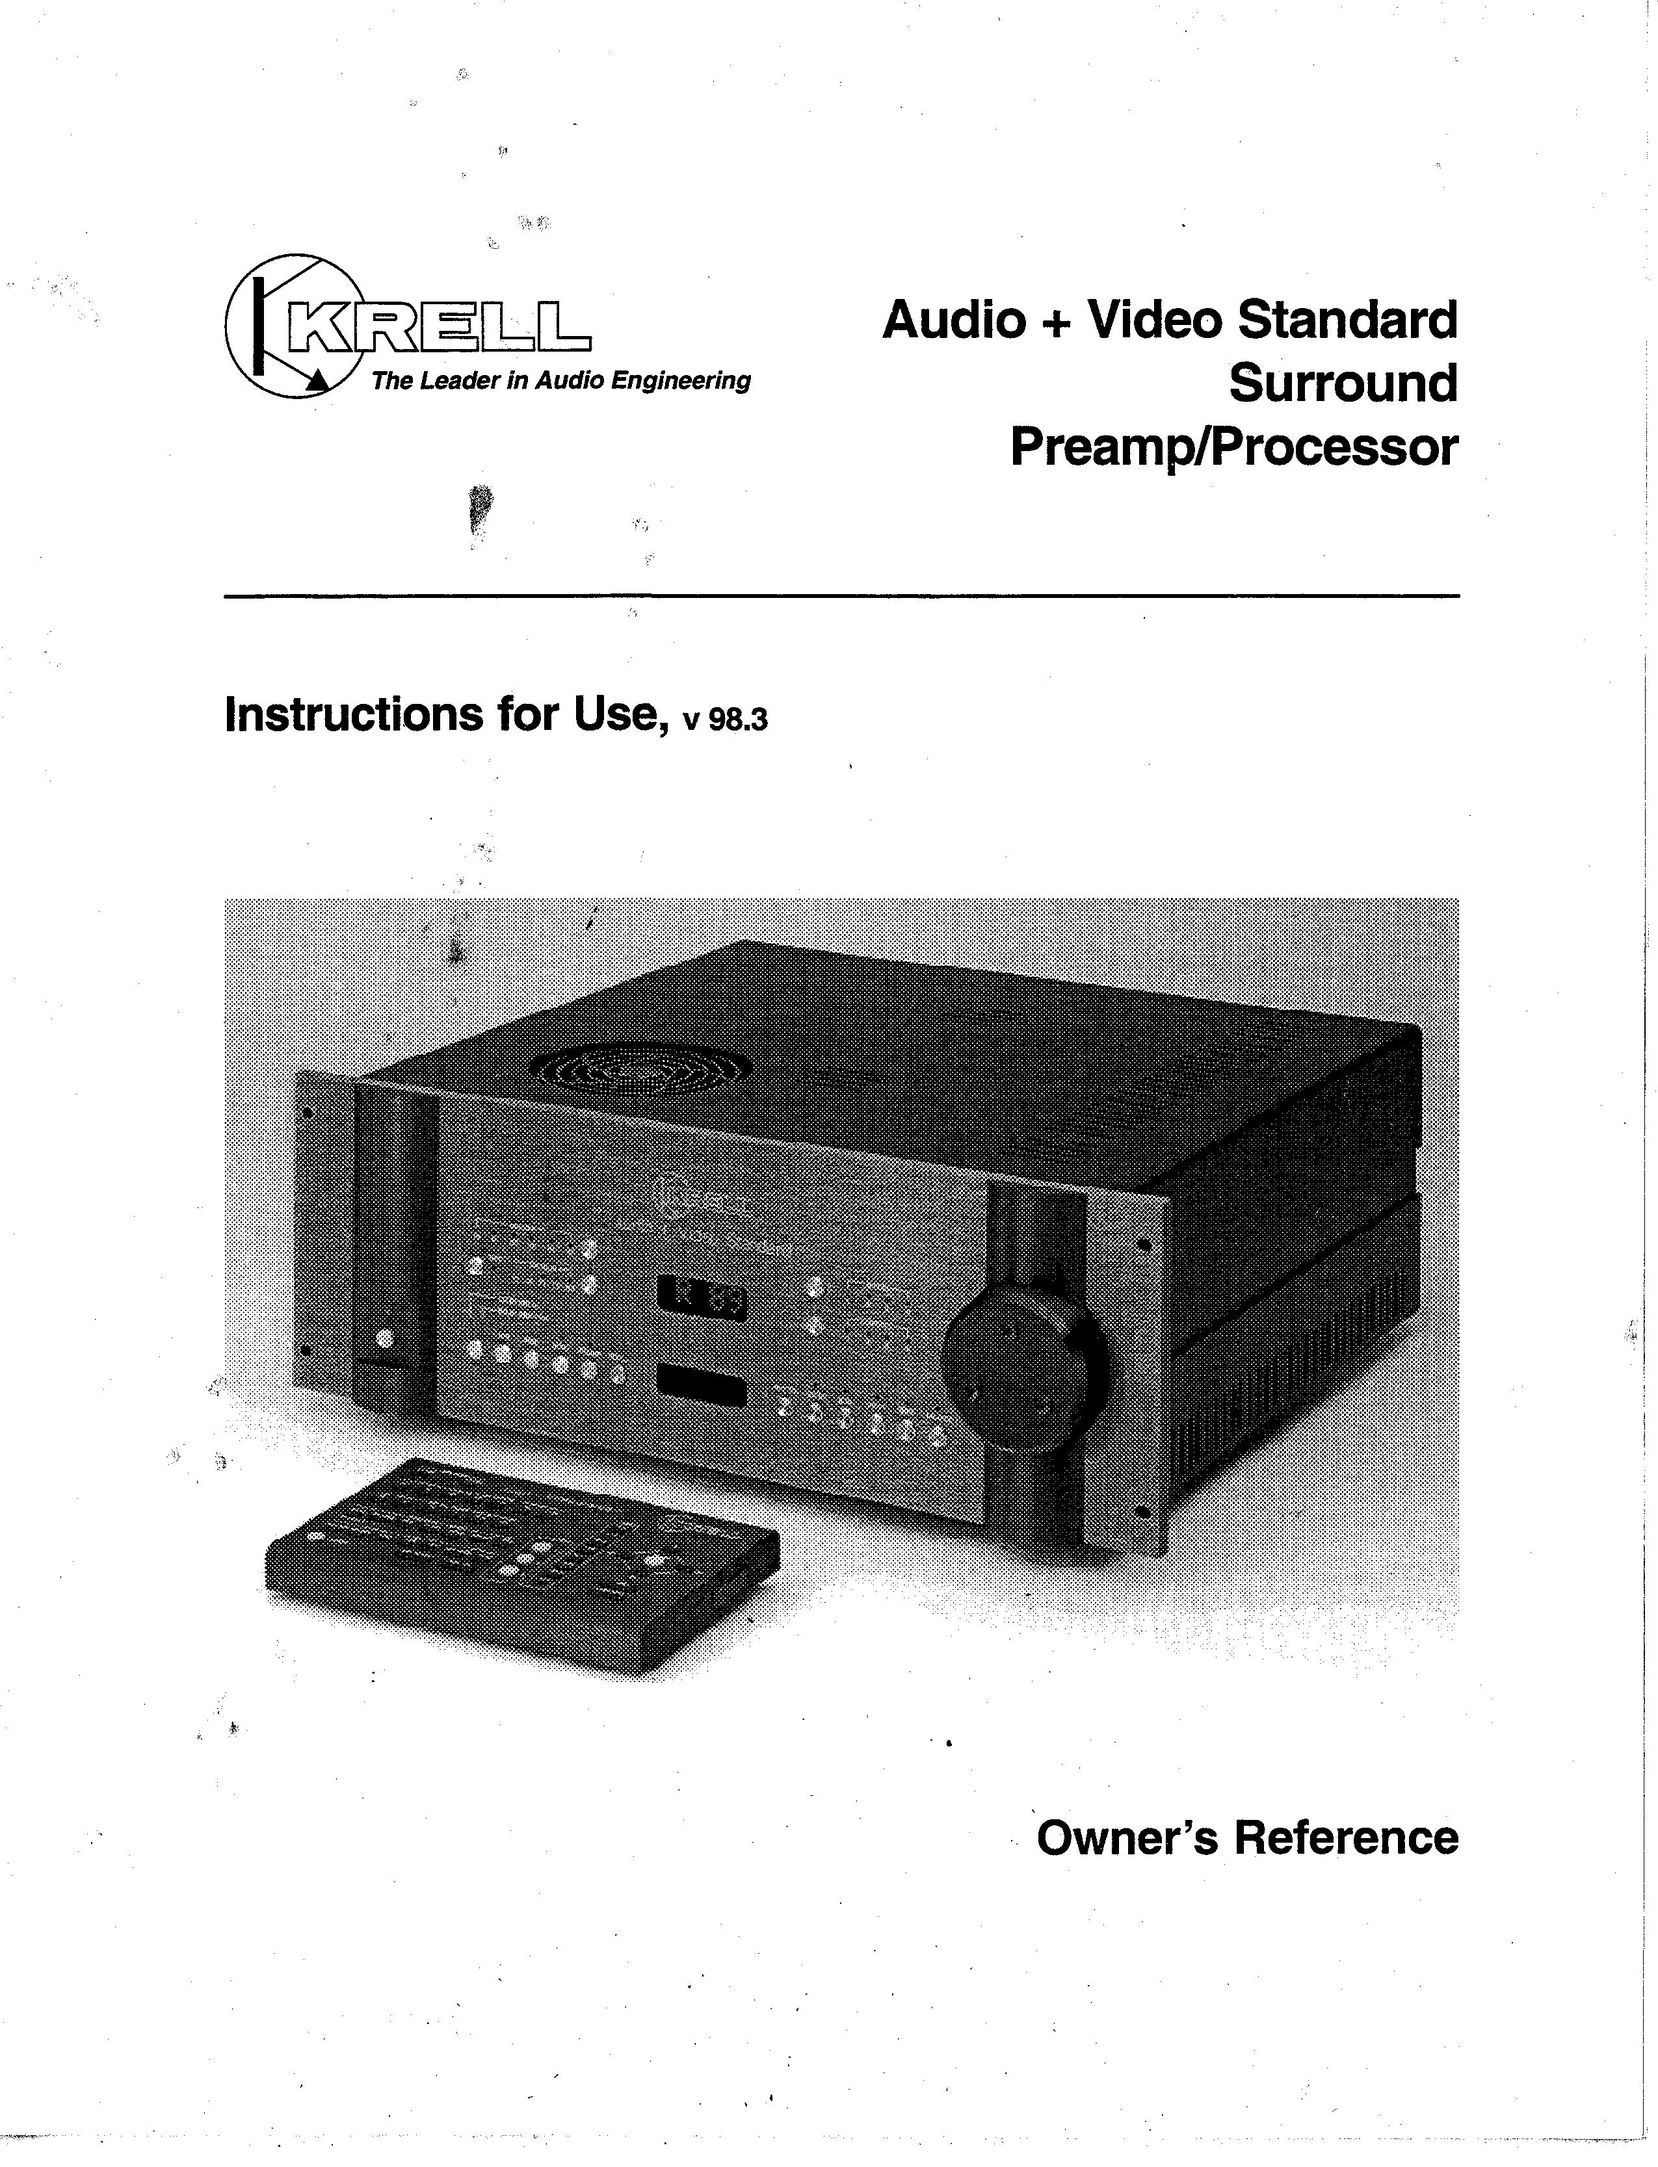 Krell Industries Audio + Video Standard Surround Preamp/Processor Stereo Amplifier User Manual